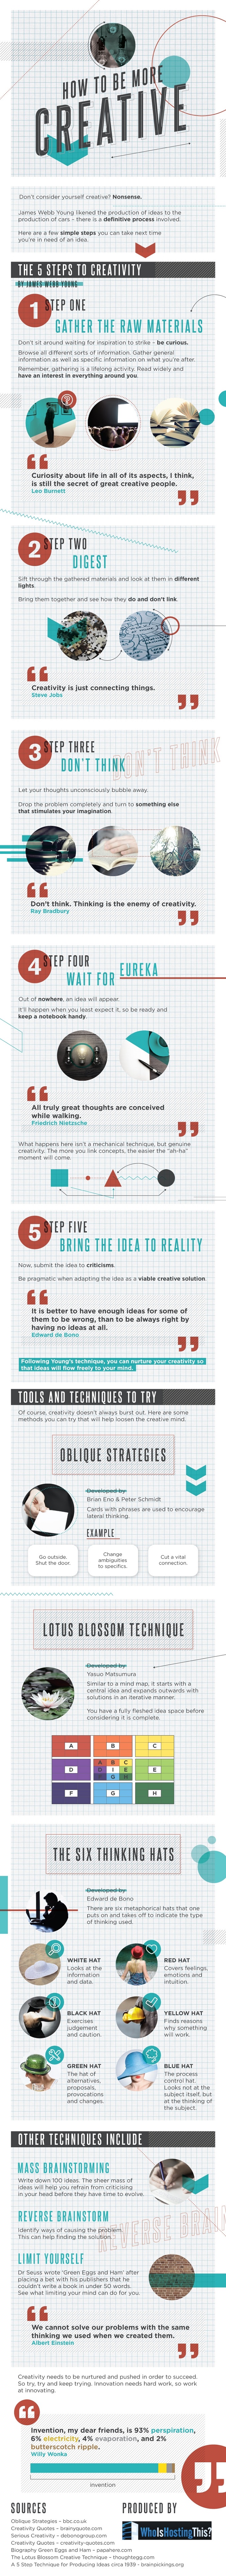 how-to-be-more-creative-infographic_52a5b02461dd4